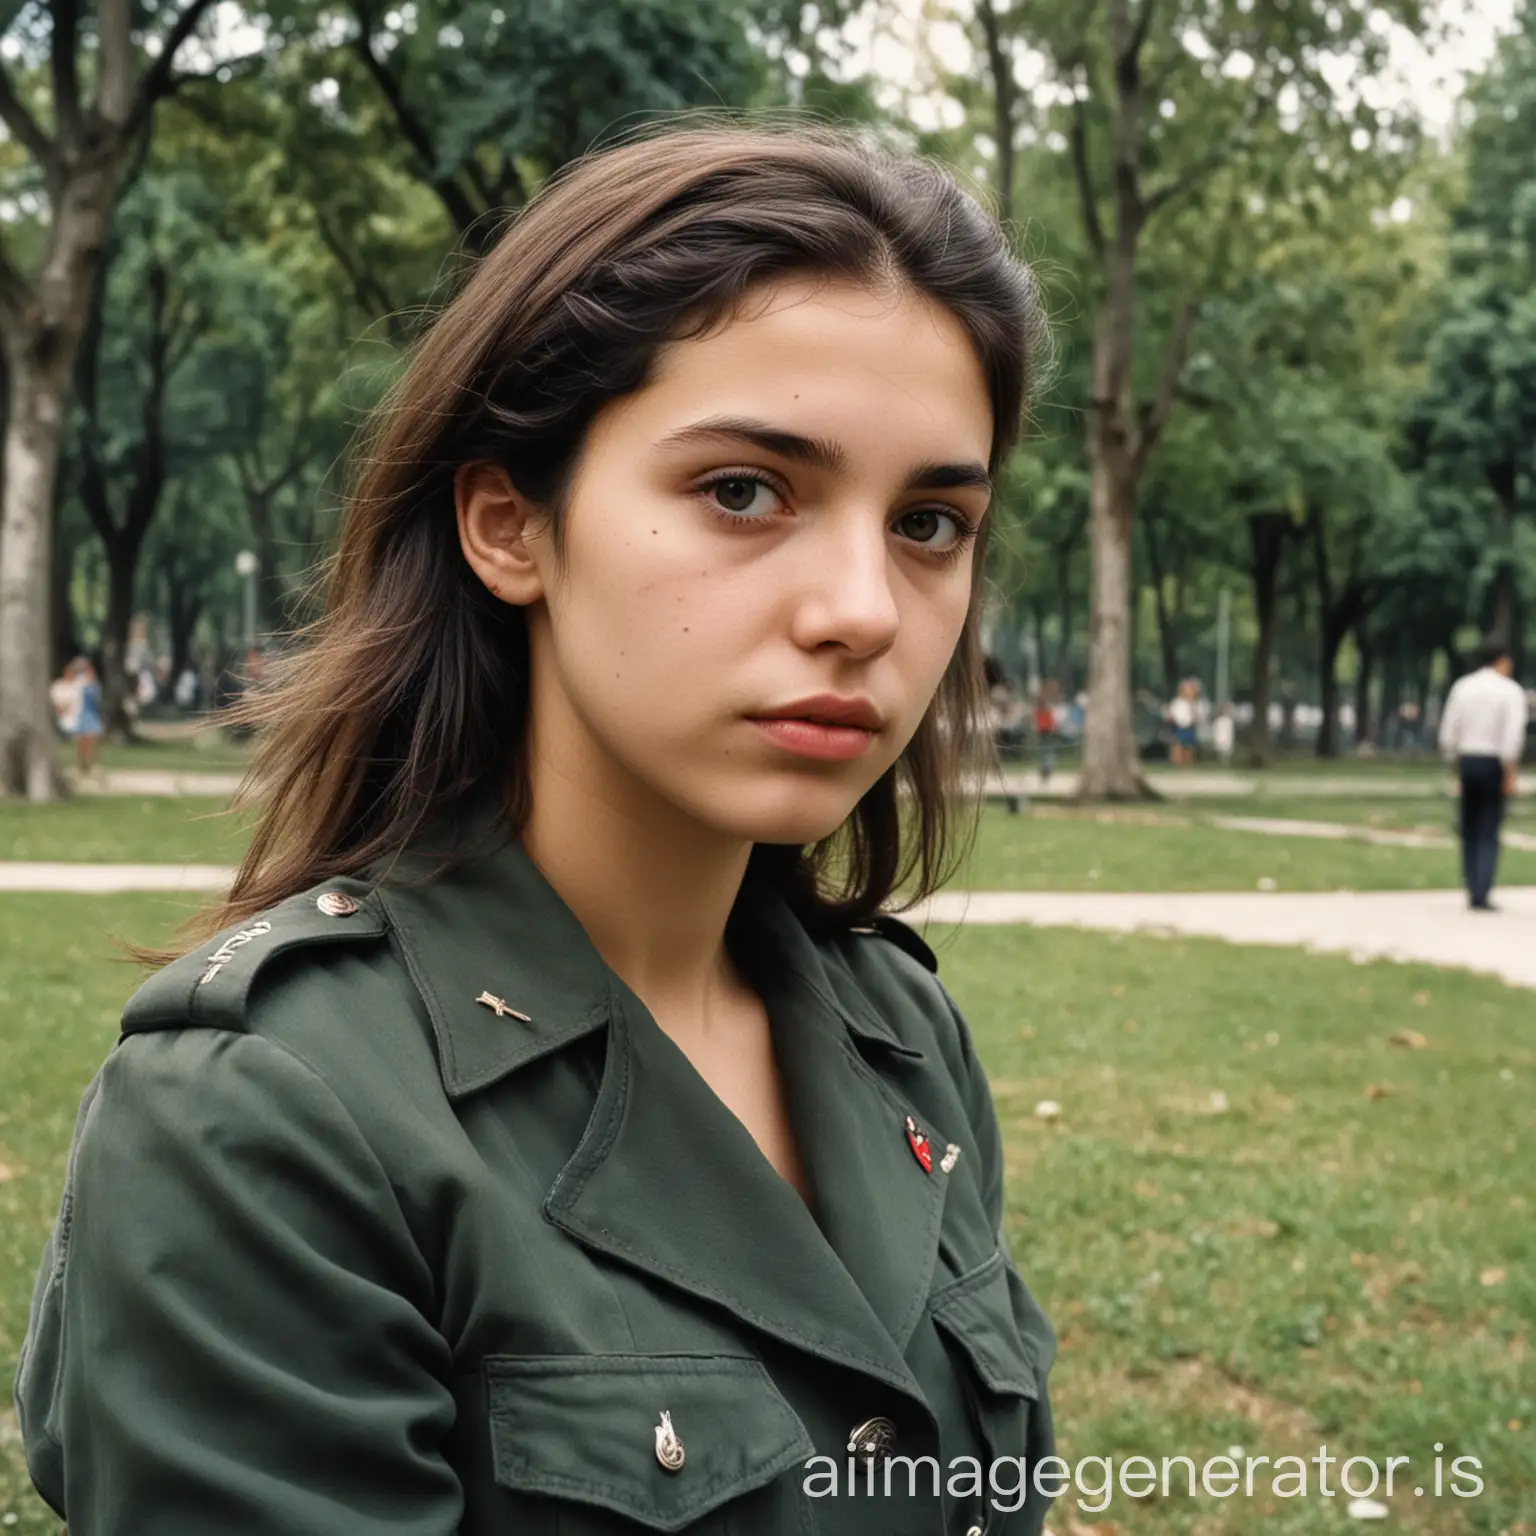 23-year-old Peronist girl, during the dictatorship era, in a park